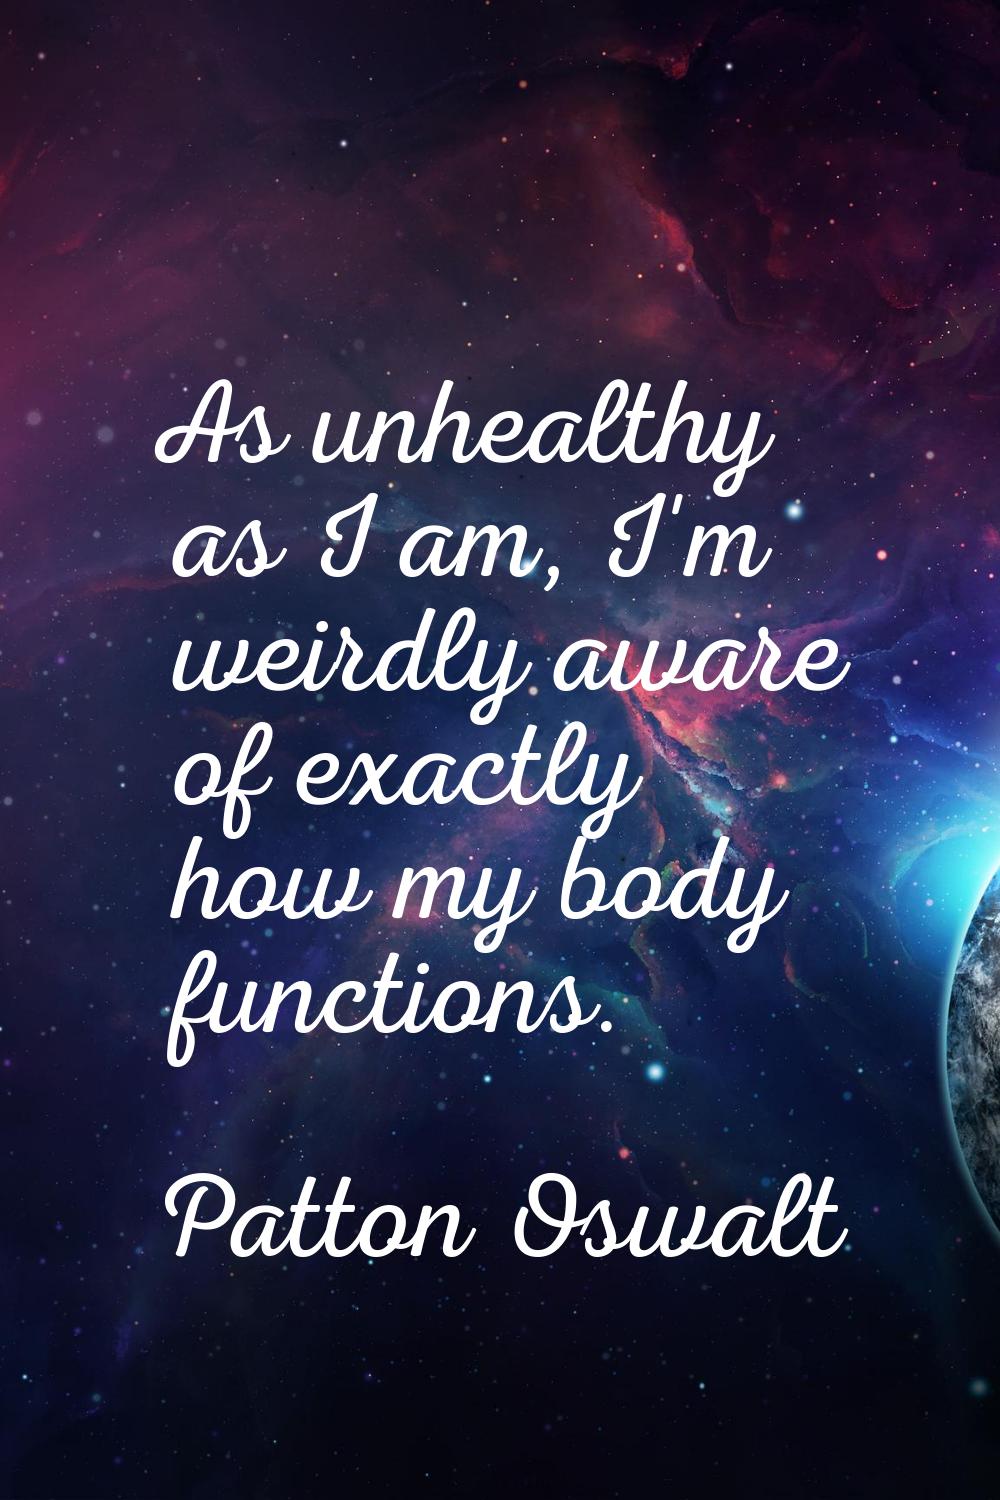 As unhealthy as I am, I'm weirdly aware of exactly how my body functions.